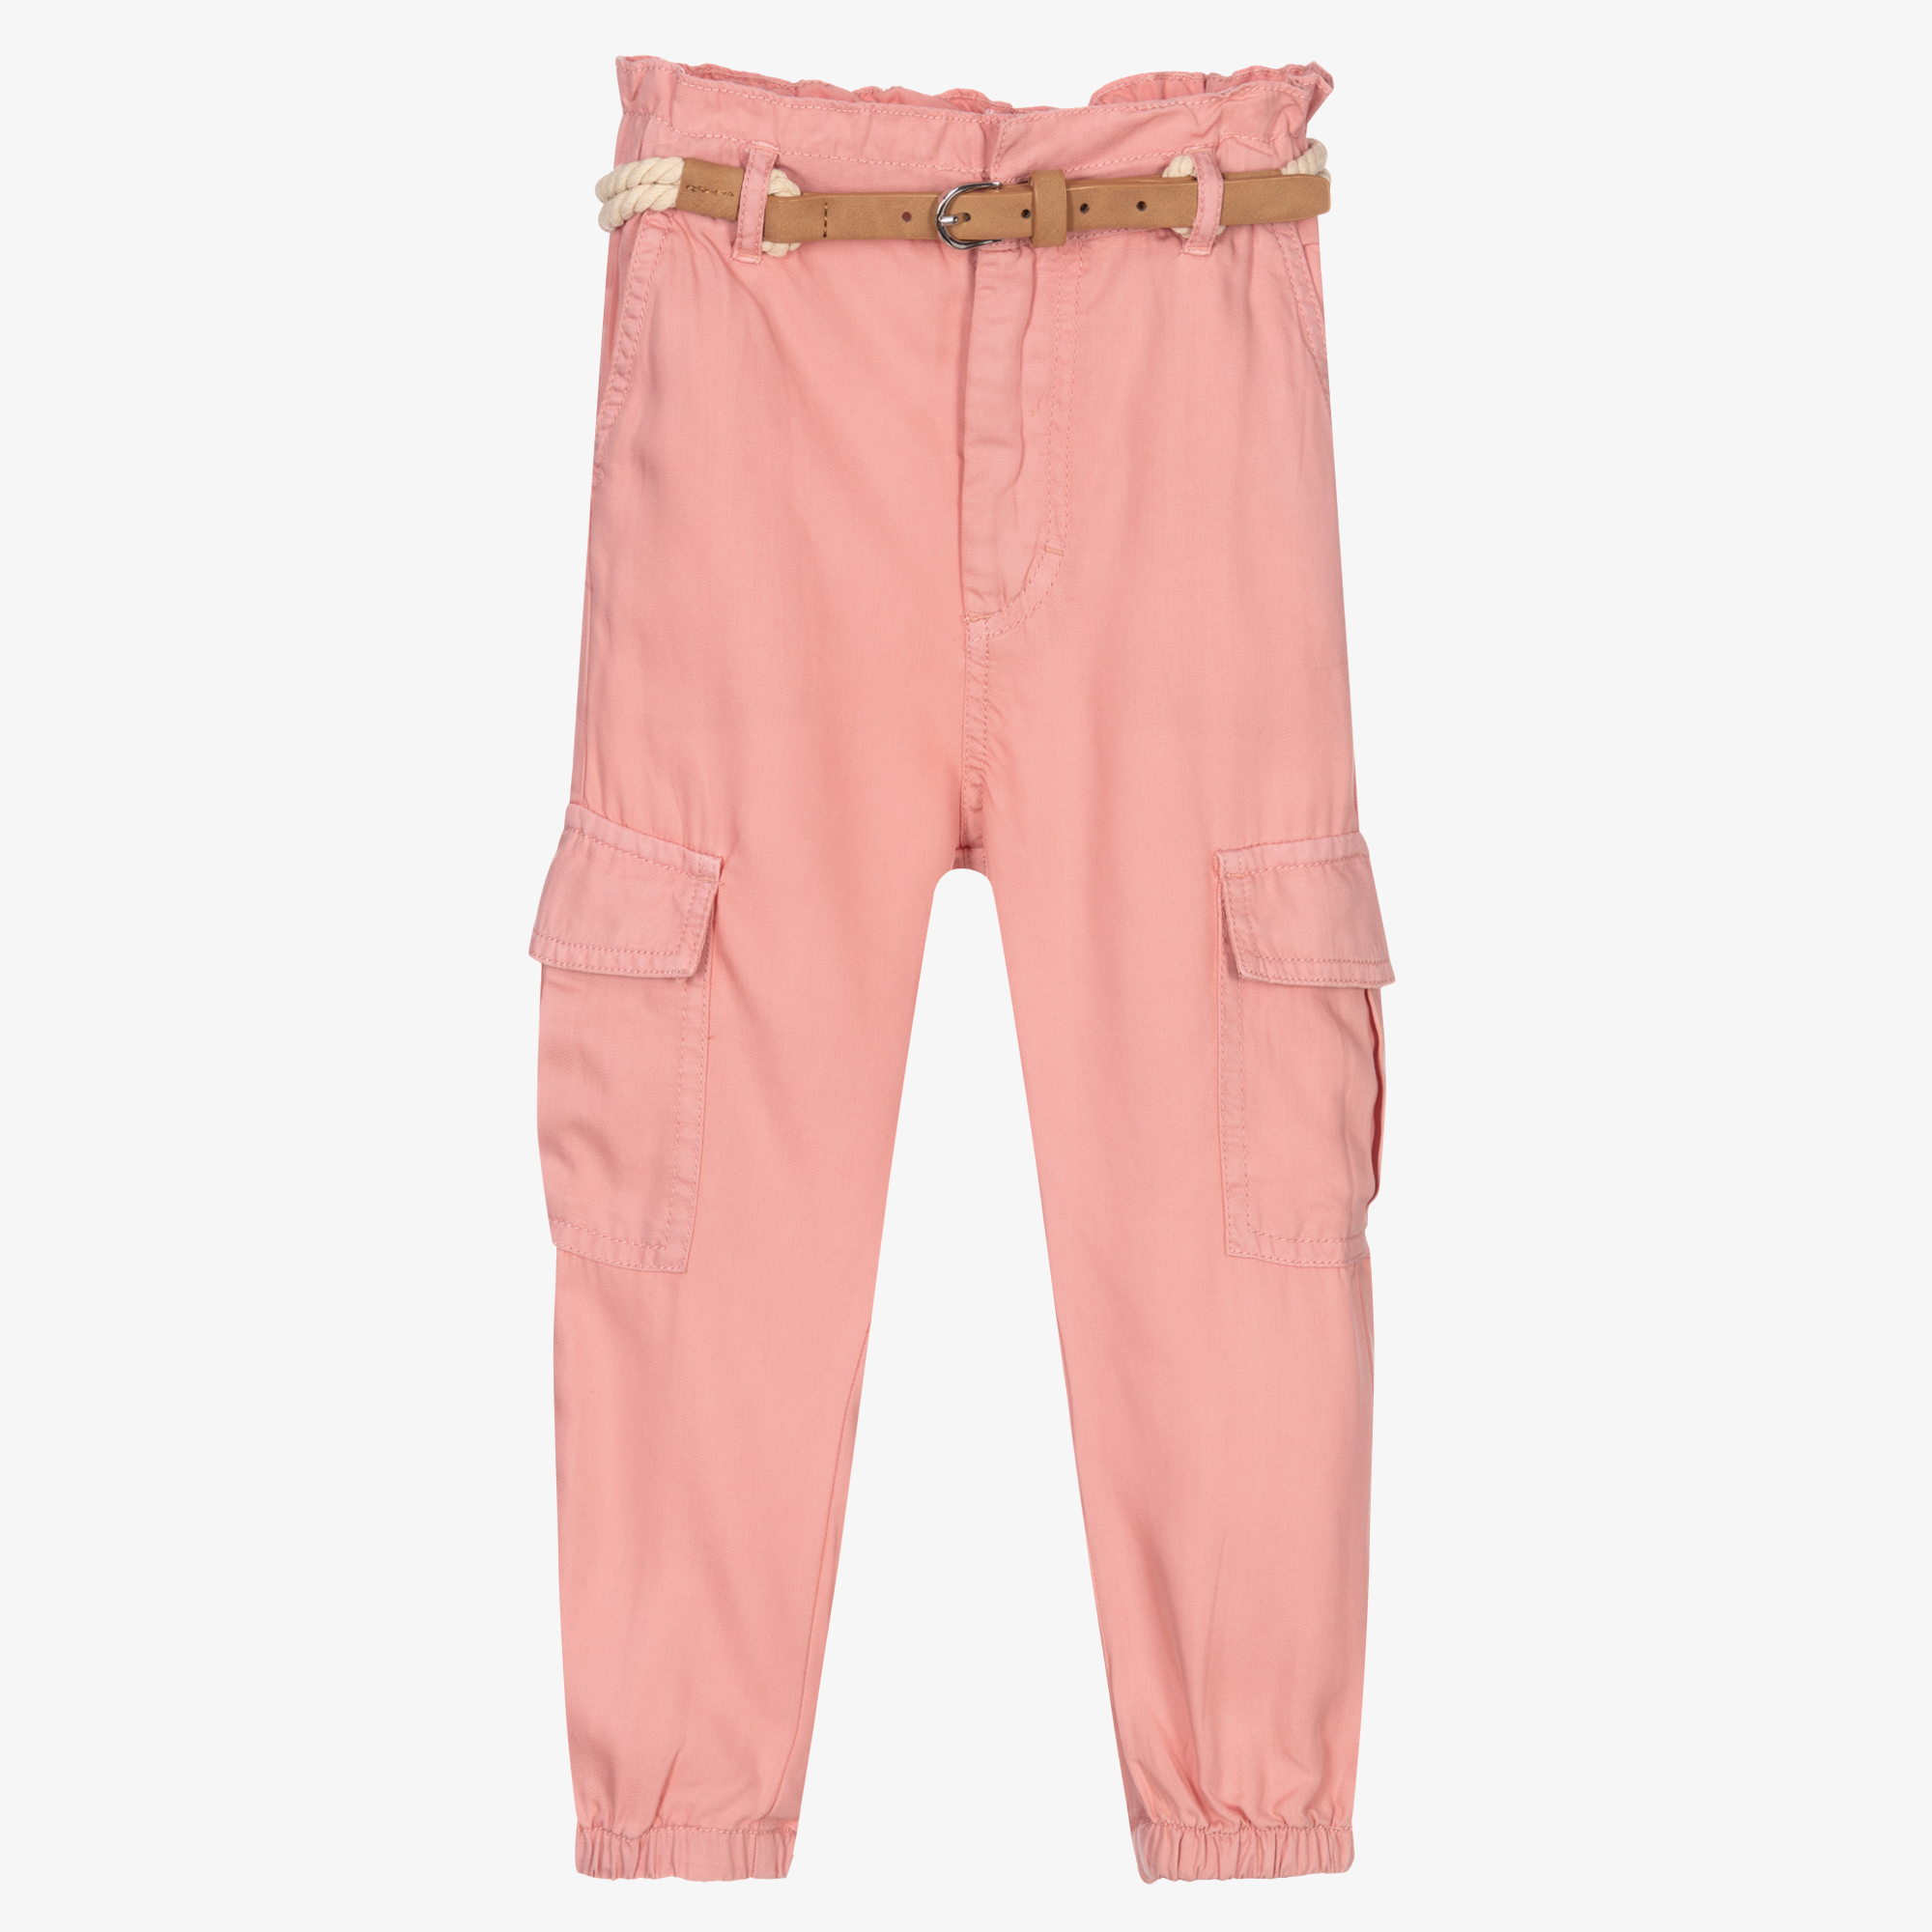 TALL pink cargo trousers size 10, perfect for a... - Depop